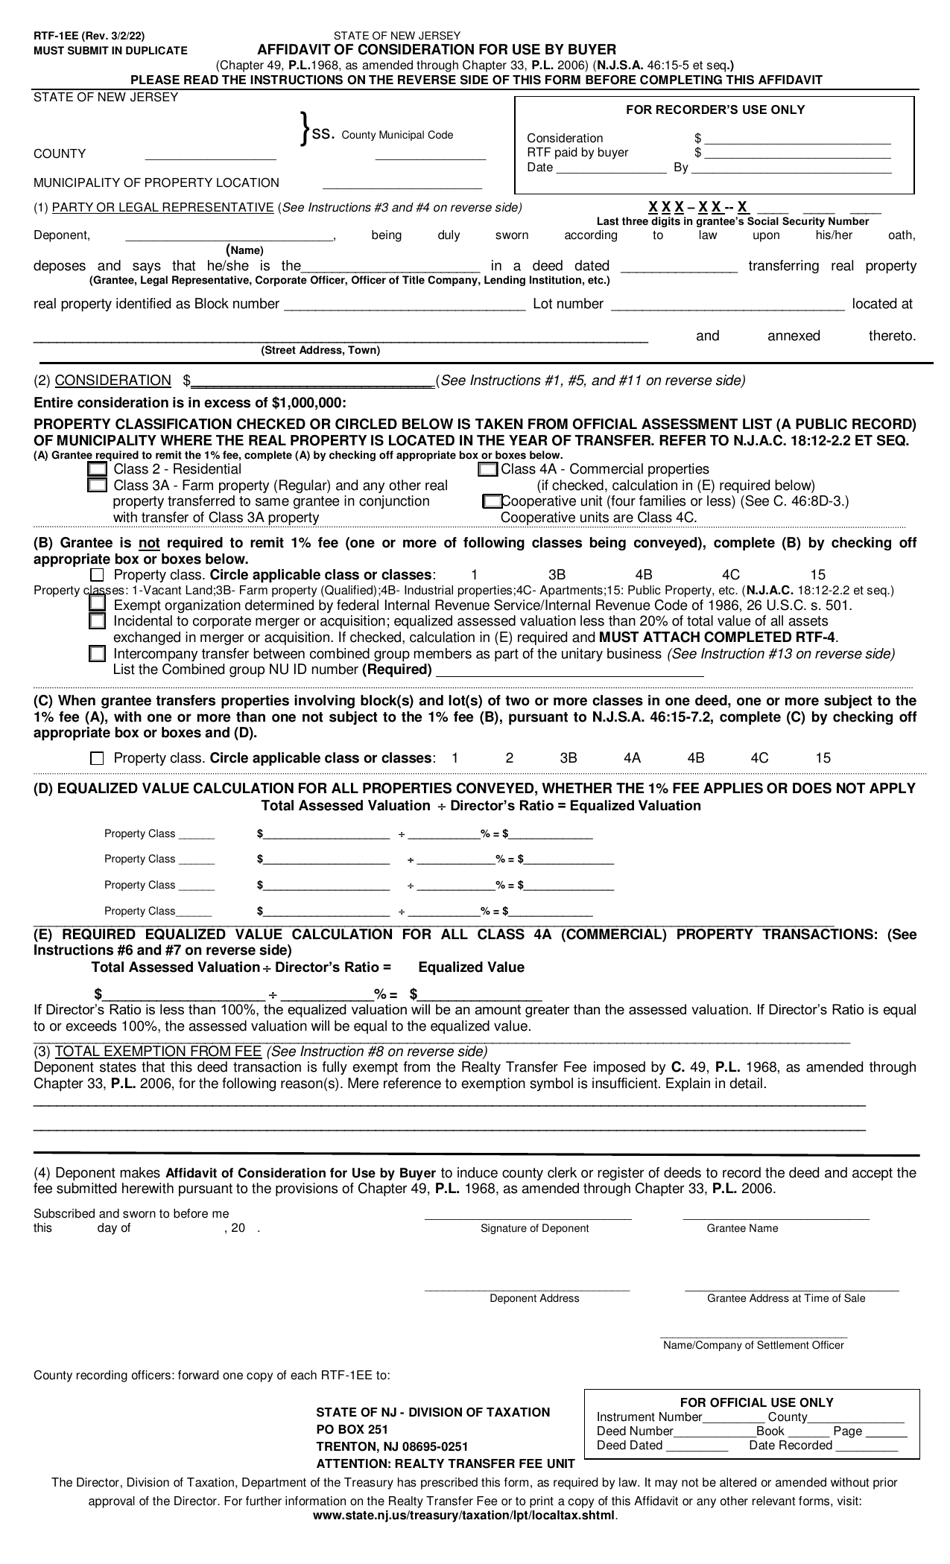 Form RTF-1EE Affidavit of Consideration for Use by Buyer - New Jersey, Page 1